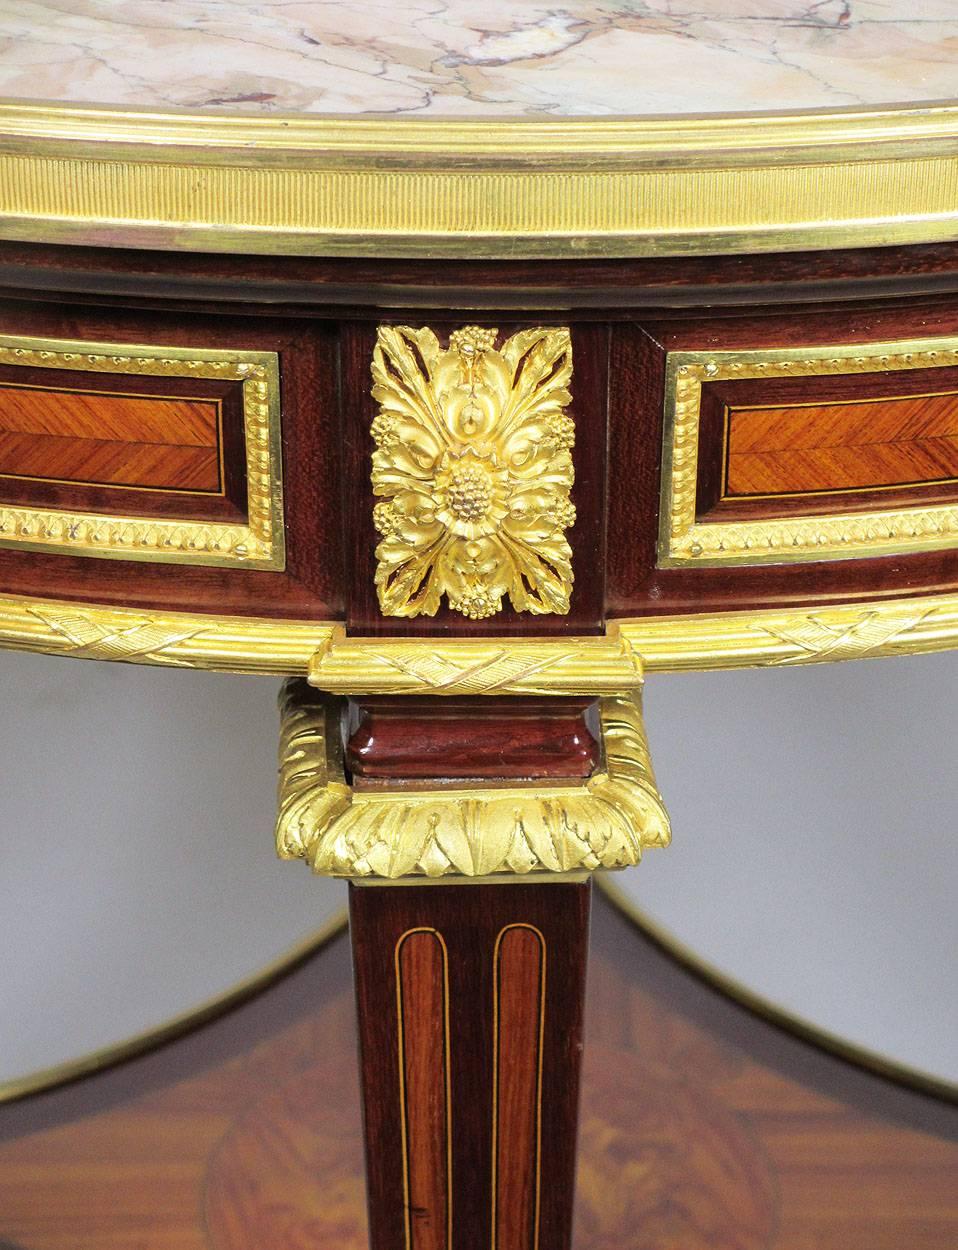 A very fine French 19th century Louis XVI style mahogany and kingwood veneer finely chased ormolu-mounted marble top gueridon side table. The circular Brêche d'Alep marble top surmounted with a gilt bronze trim raised on four square legs with a